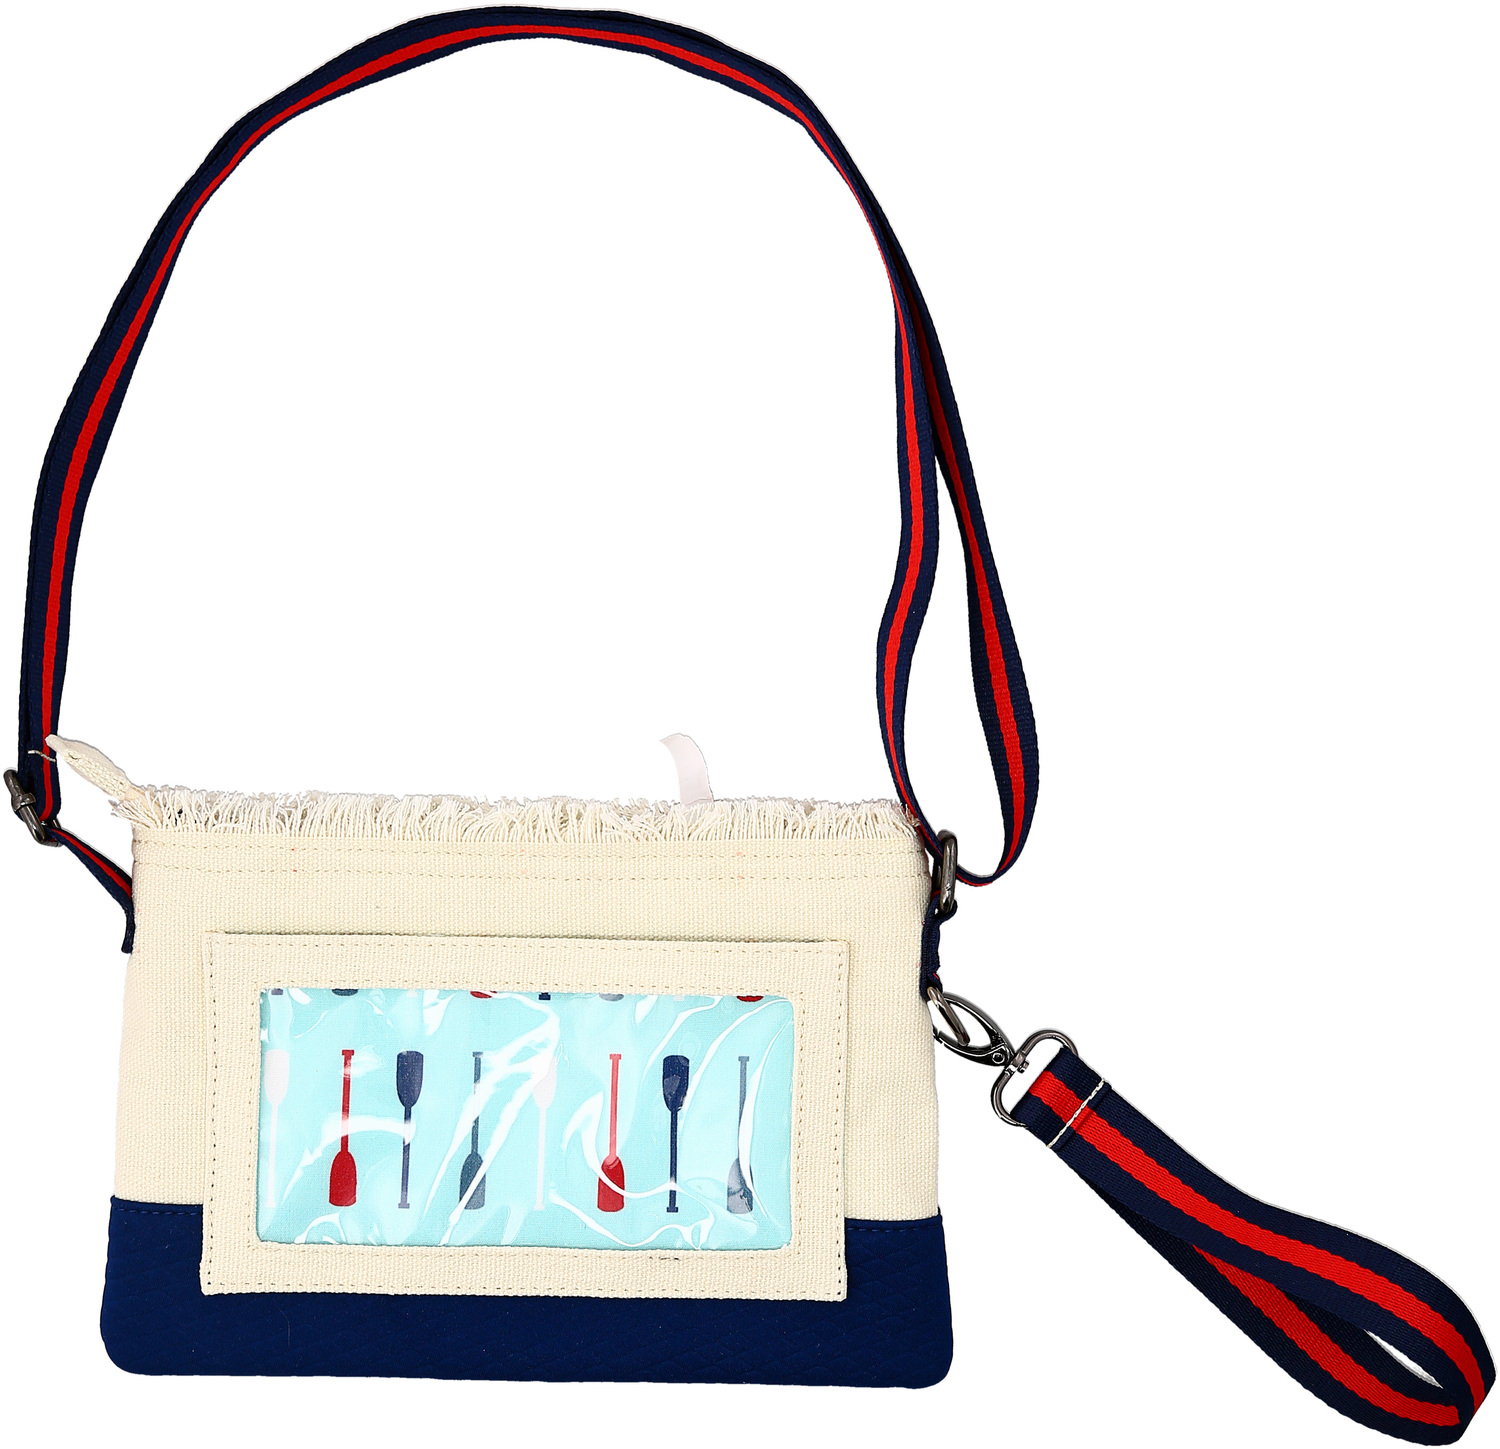 Lake by We People - Lake - 9.5" x 6.5" Touch Screen Crossbody Bag